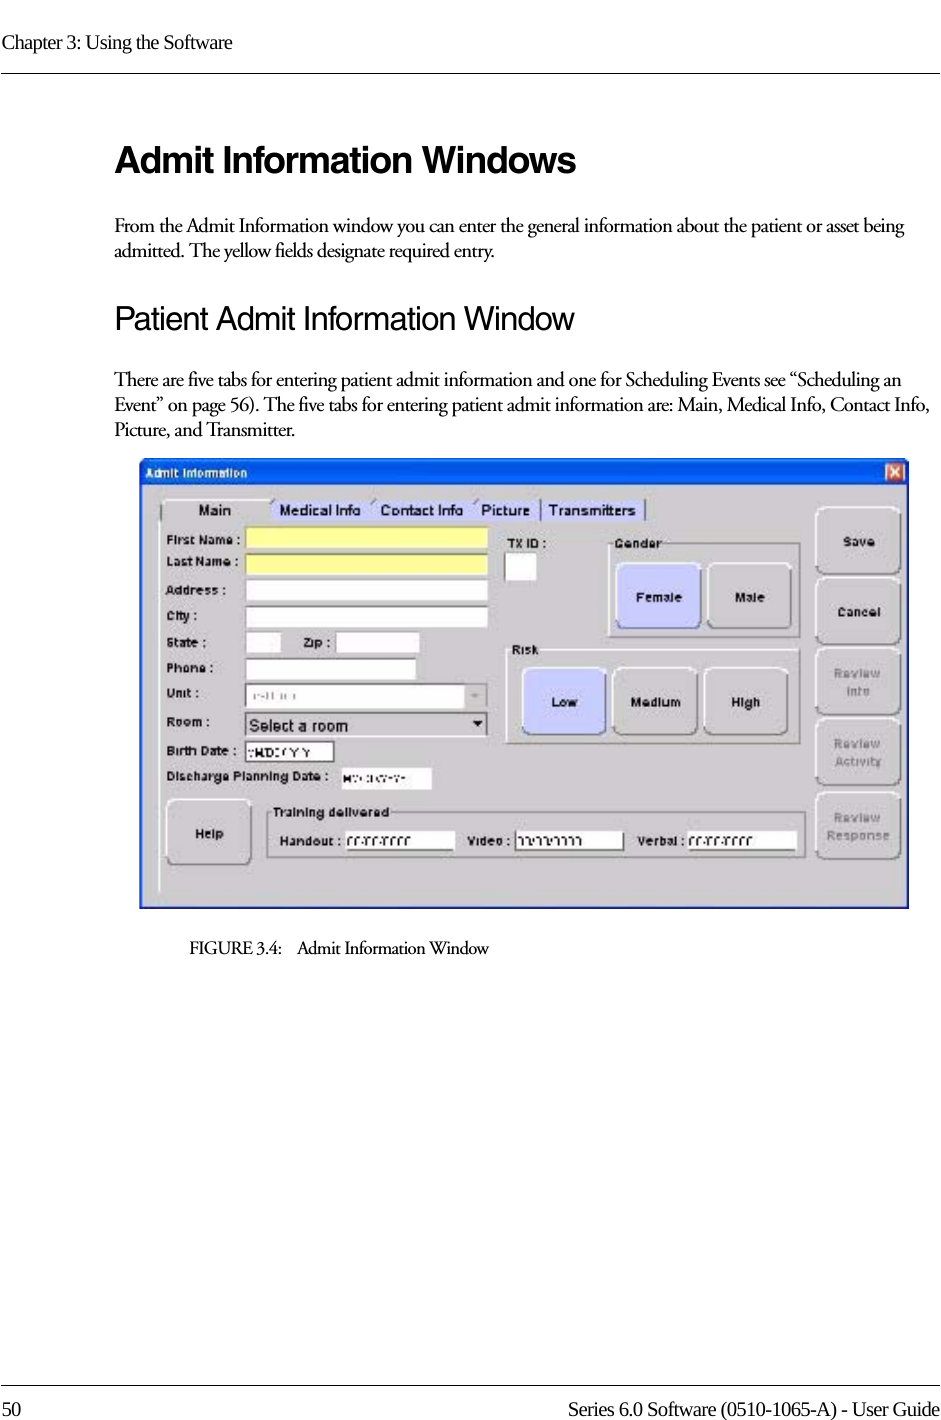 Chapter 3: Using the Software50 Series 6.0 Software (0510-1065-A) - User GuideAdmit Information WindowsFrom the Admit Information window you can enter the general information about the patient or asset being admitted. The yellow fields designate required entry. Patient Admit Information WindowThere are five tabs for entering patient admit information and one for Scheduling Events see “Scheduling an Event” on page 56). The five tabs for entering patient admit information are: Main, Medical Info, Contact Info, Picture, and Transmitter. FIGURE 3.4:    Admit Information Window